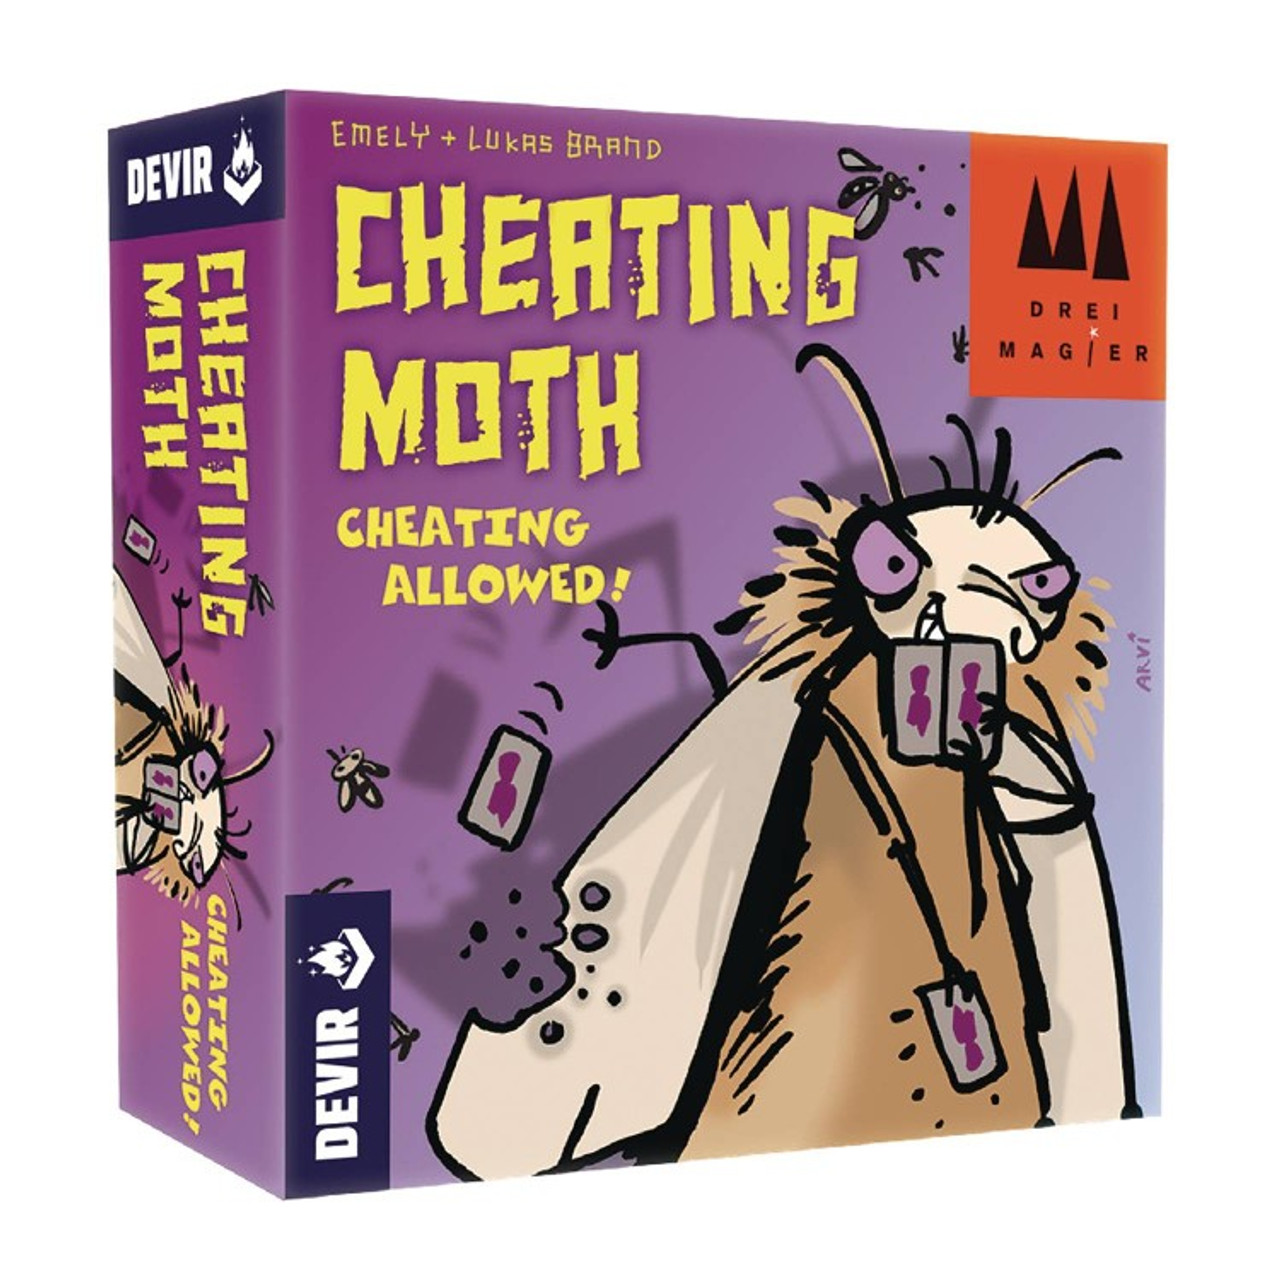 Differences with Cheating Moth